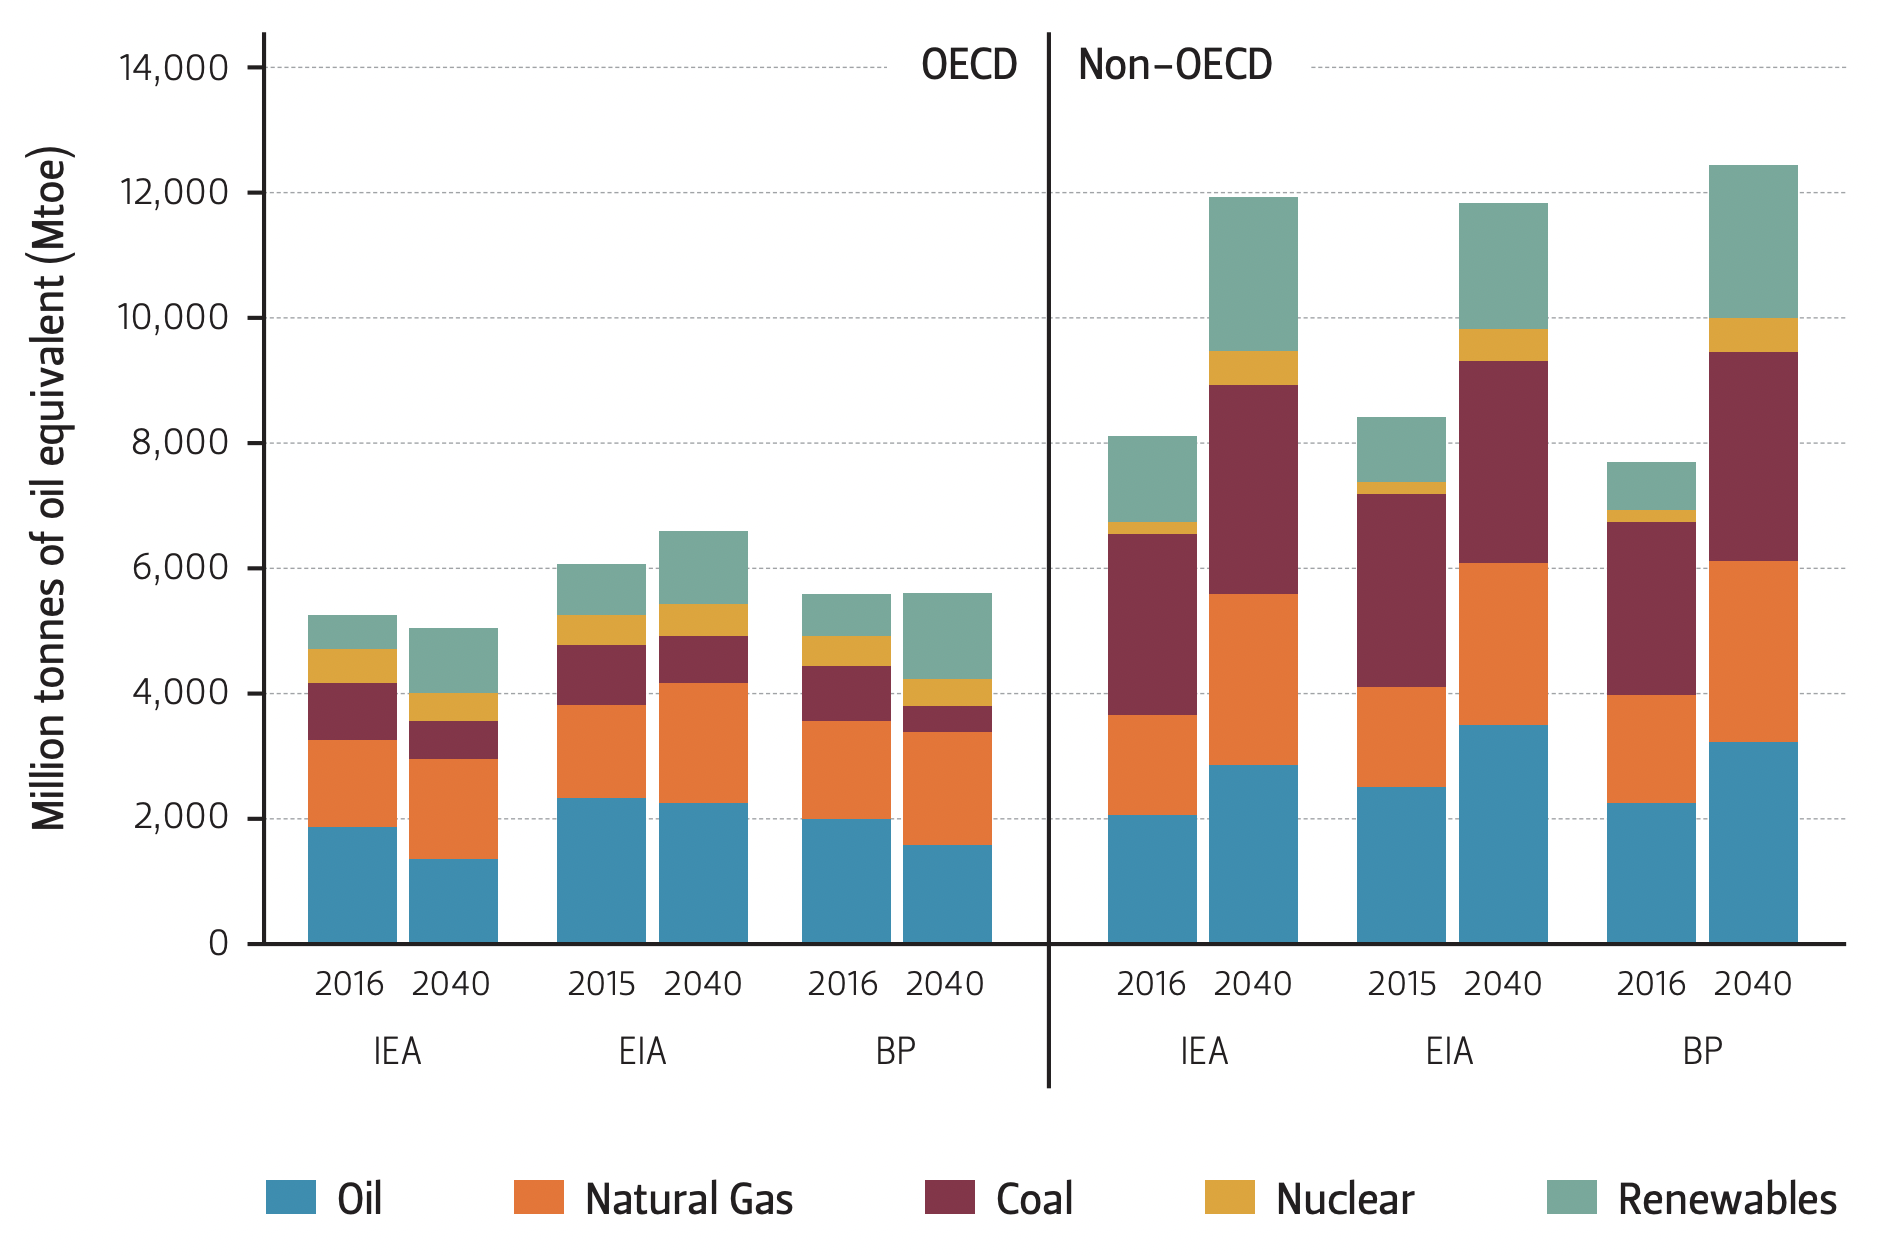 TOTAL ENERGY DEMAND BY FUEL, OECD VS. NON-OECD COUNTRIES